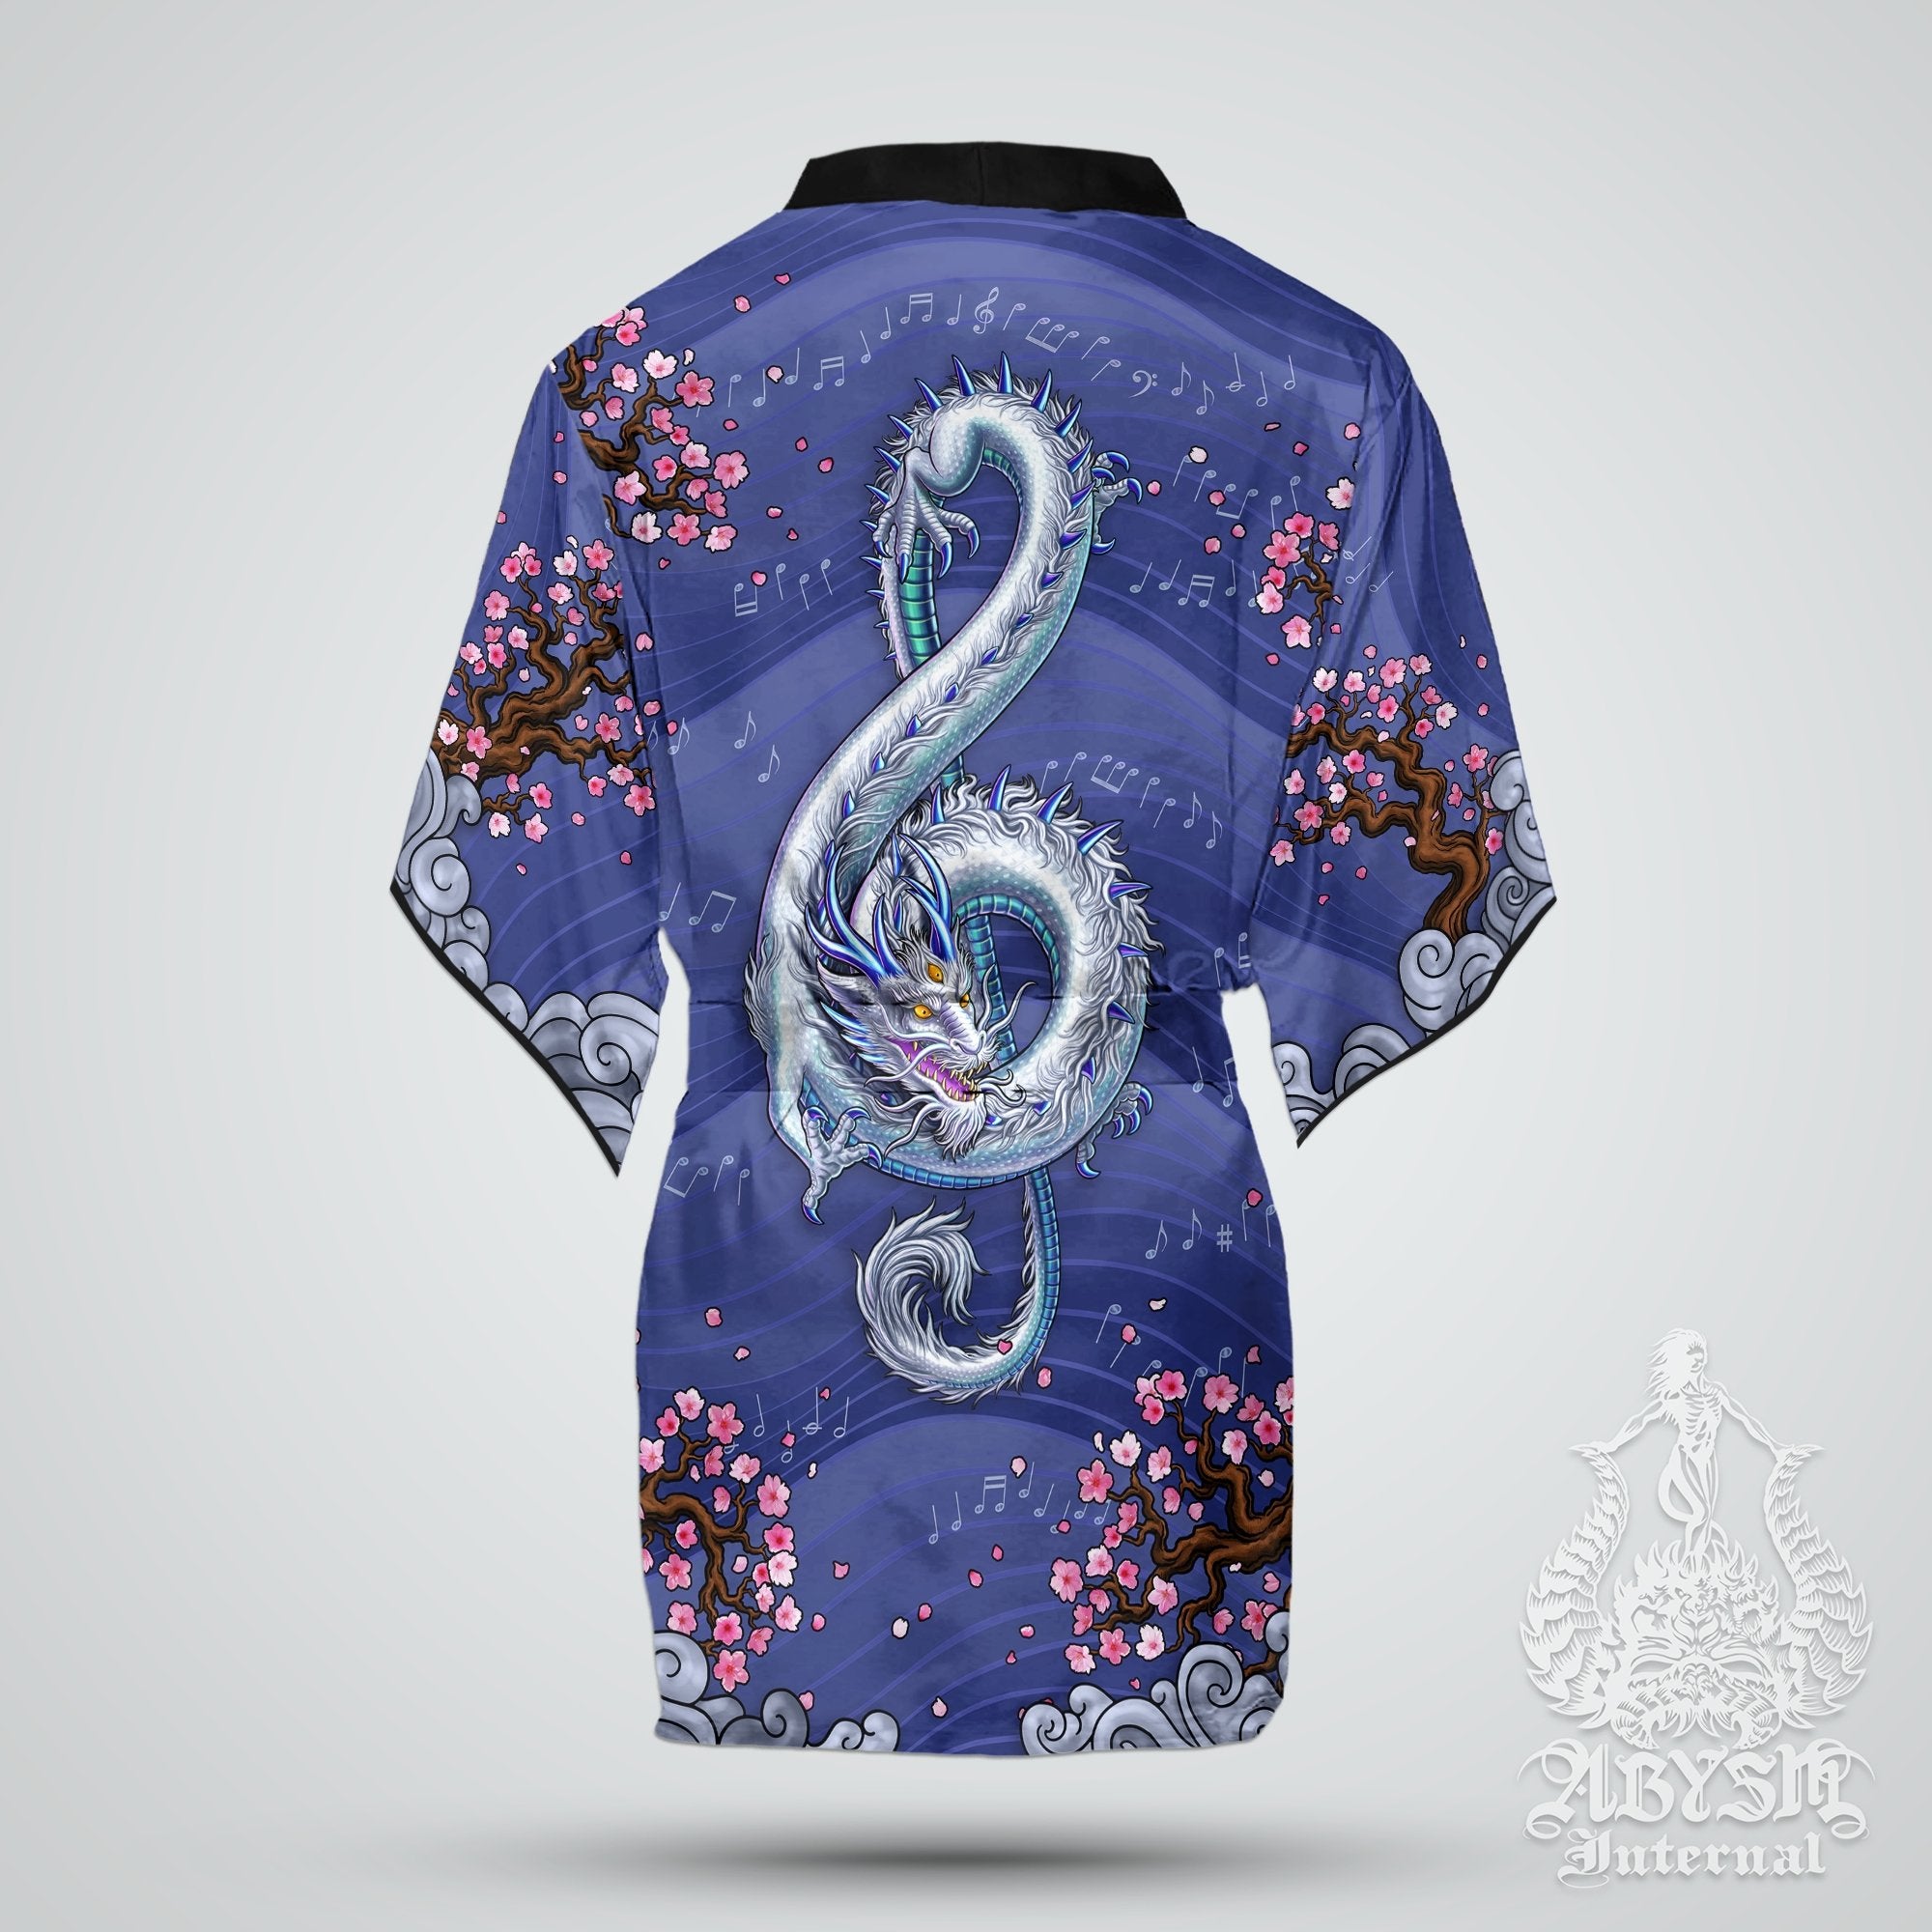 Music Cover Up, Beach Outfit, Party Kimono, Summer Festival Robe, Indie and Alternative Clothing, Unisex - Dragon, Blue - Abysm Internal